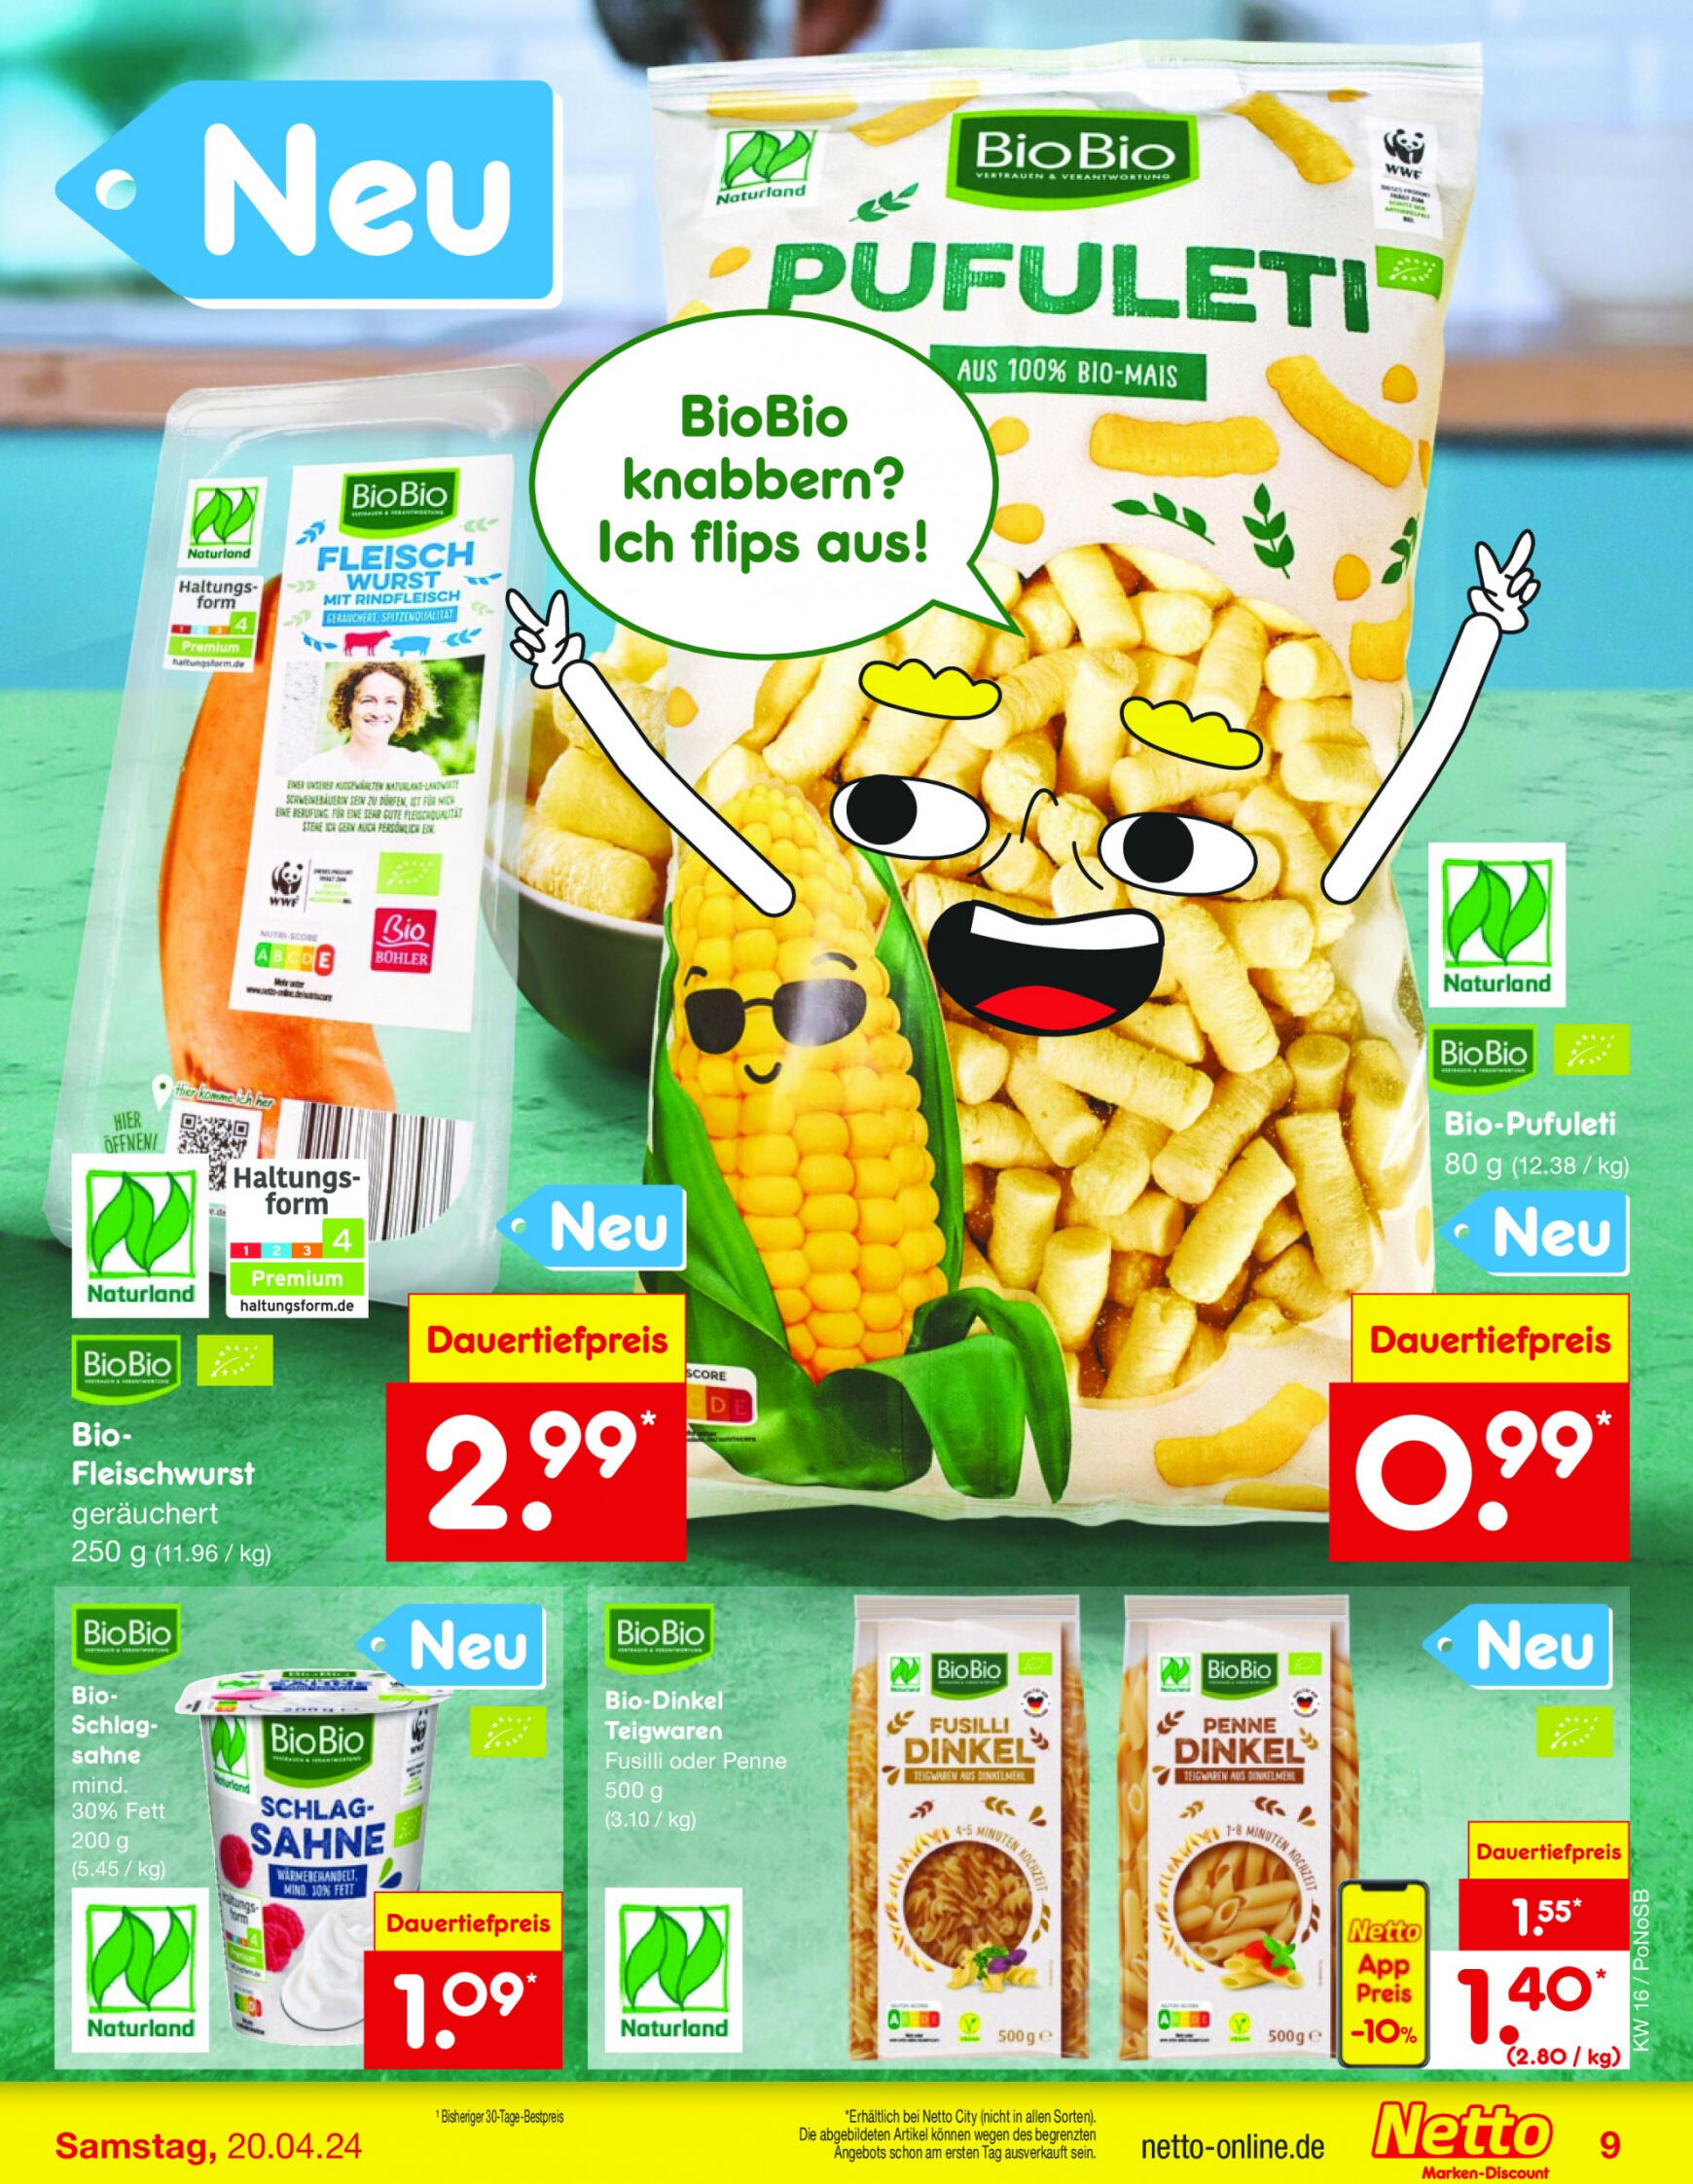 netto - Flyer Netto aktuell 15.04. - 20.04. - page: 9